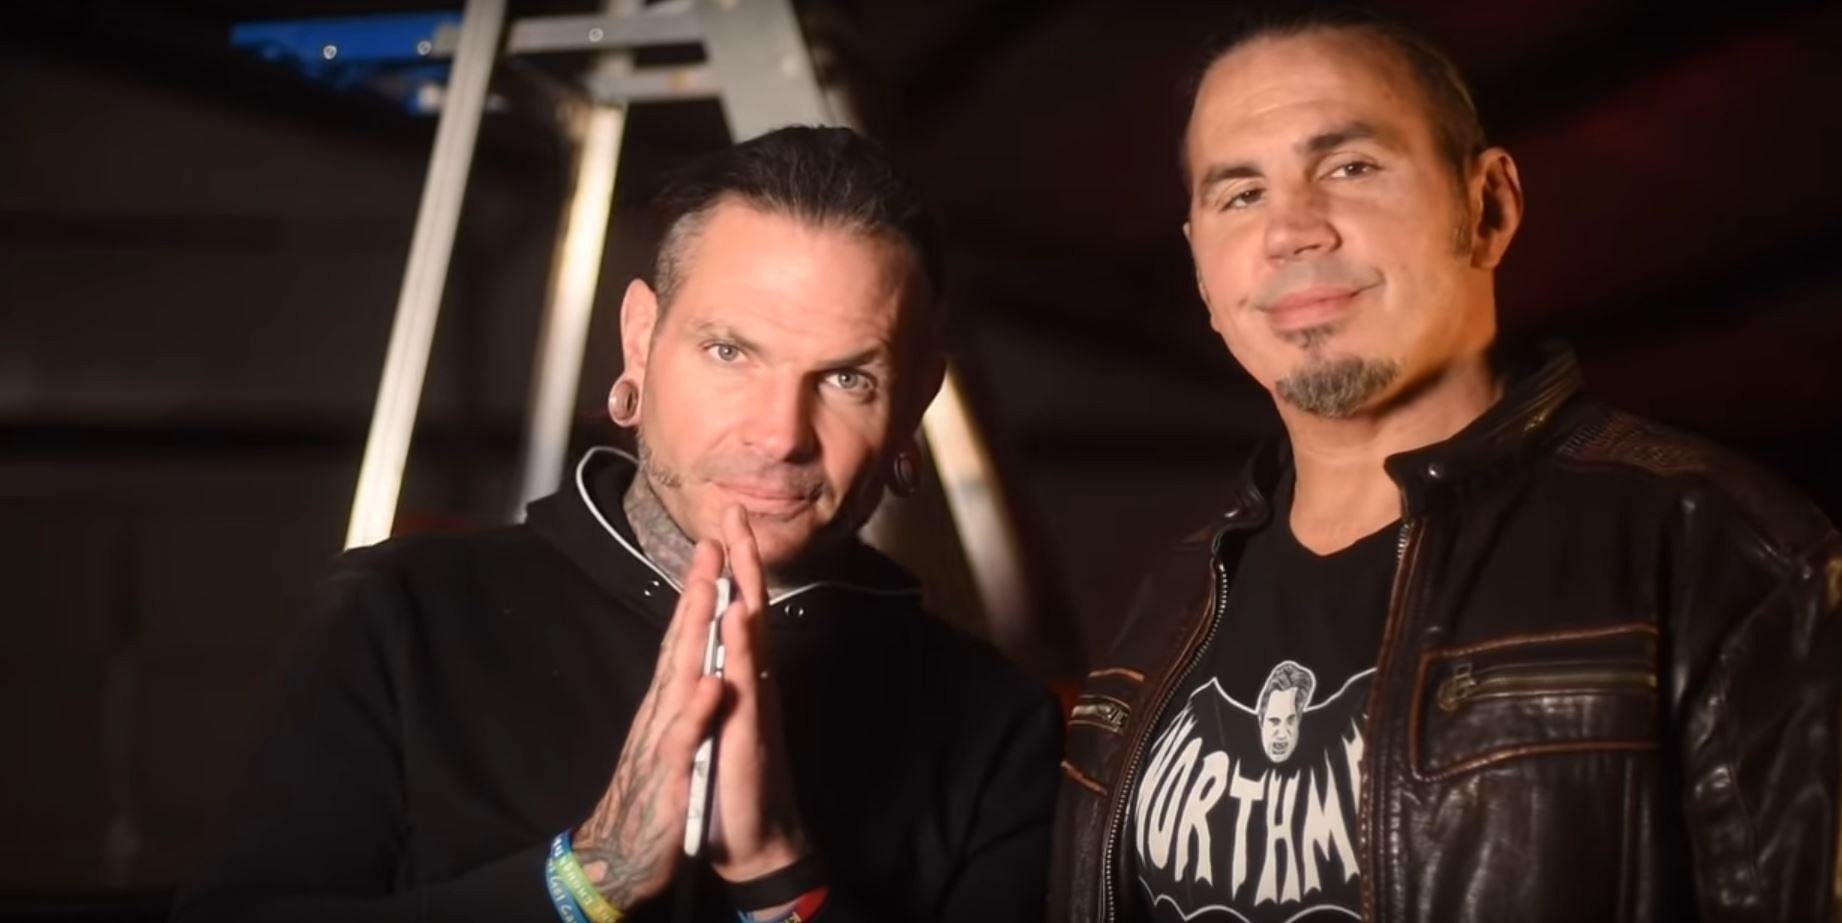 The Hardy Boyz are reuniting after three years.